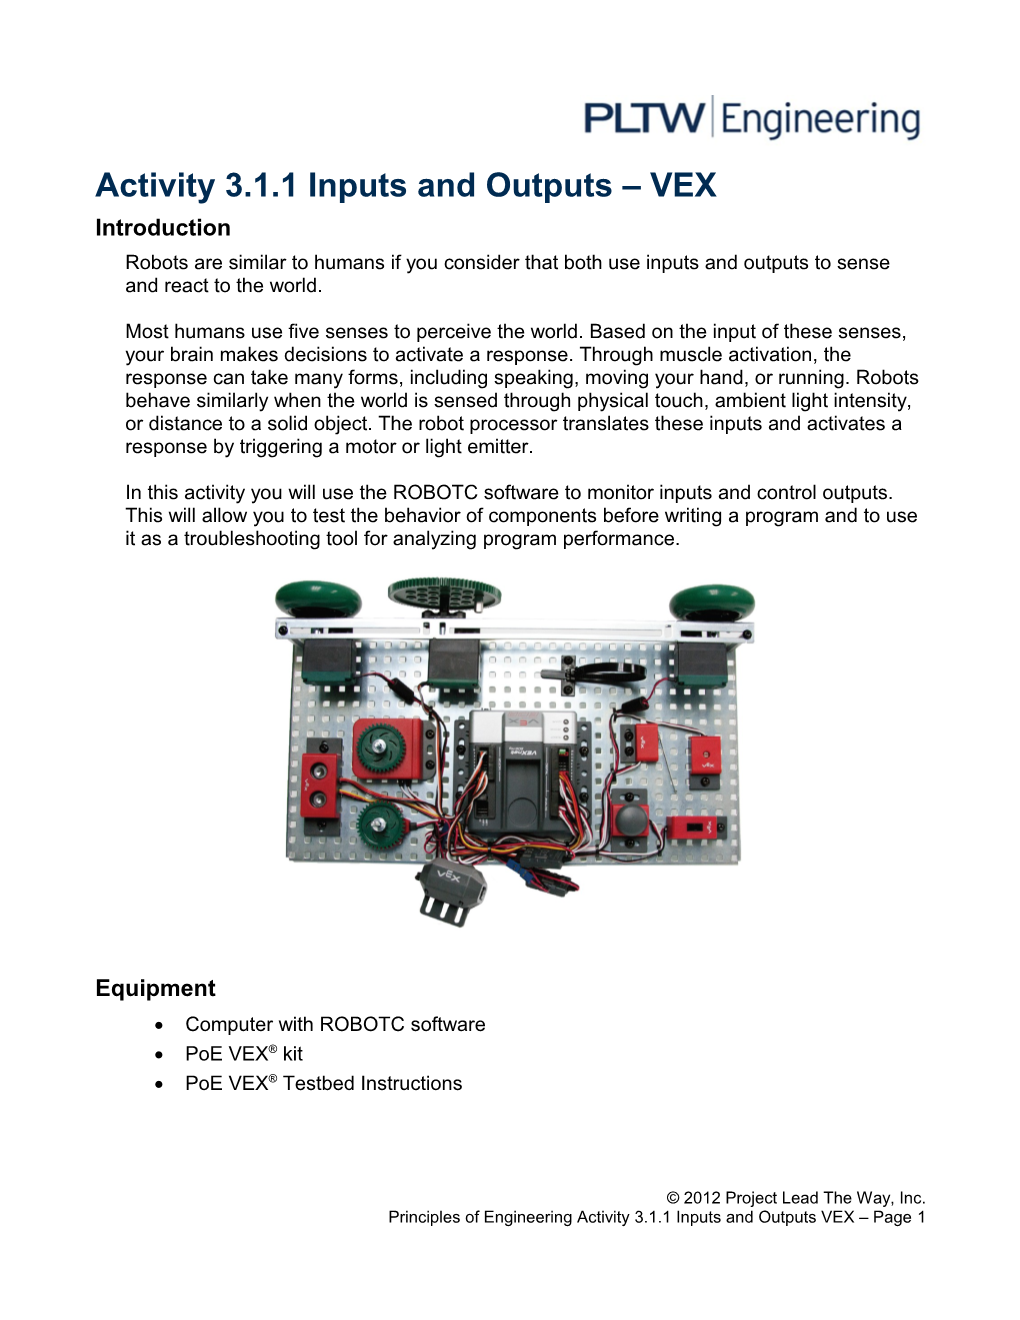 Activity 3.1.1 Inputs and Outputs VEX